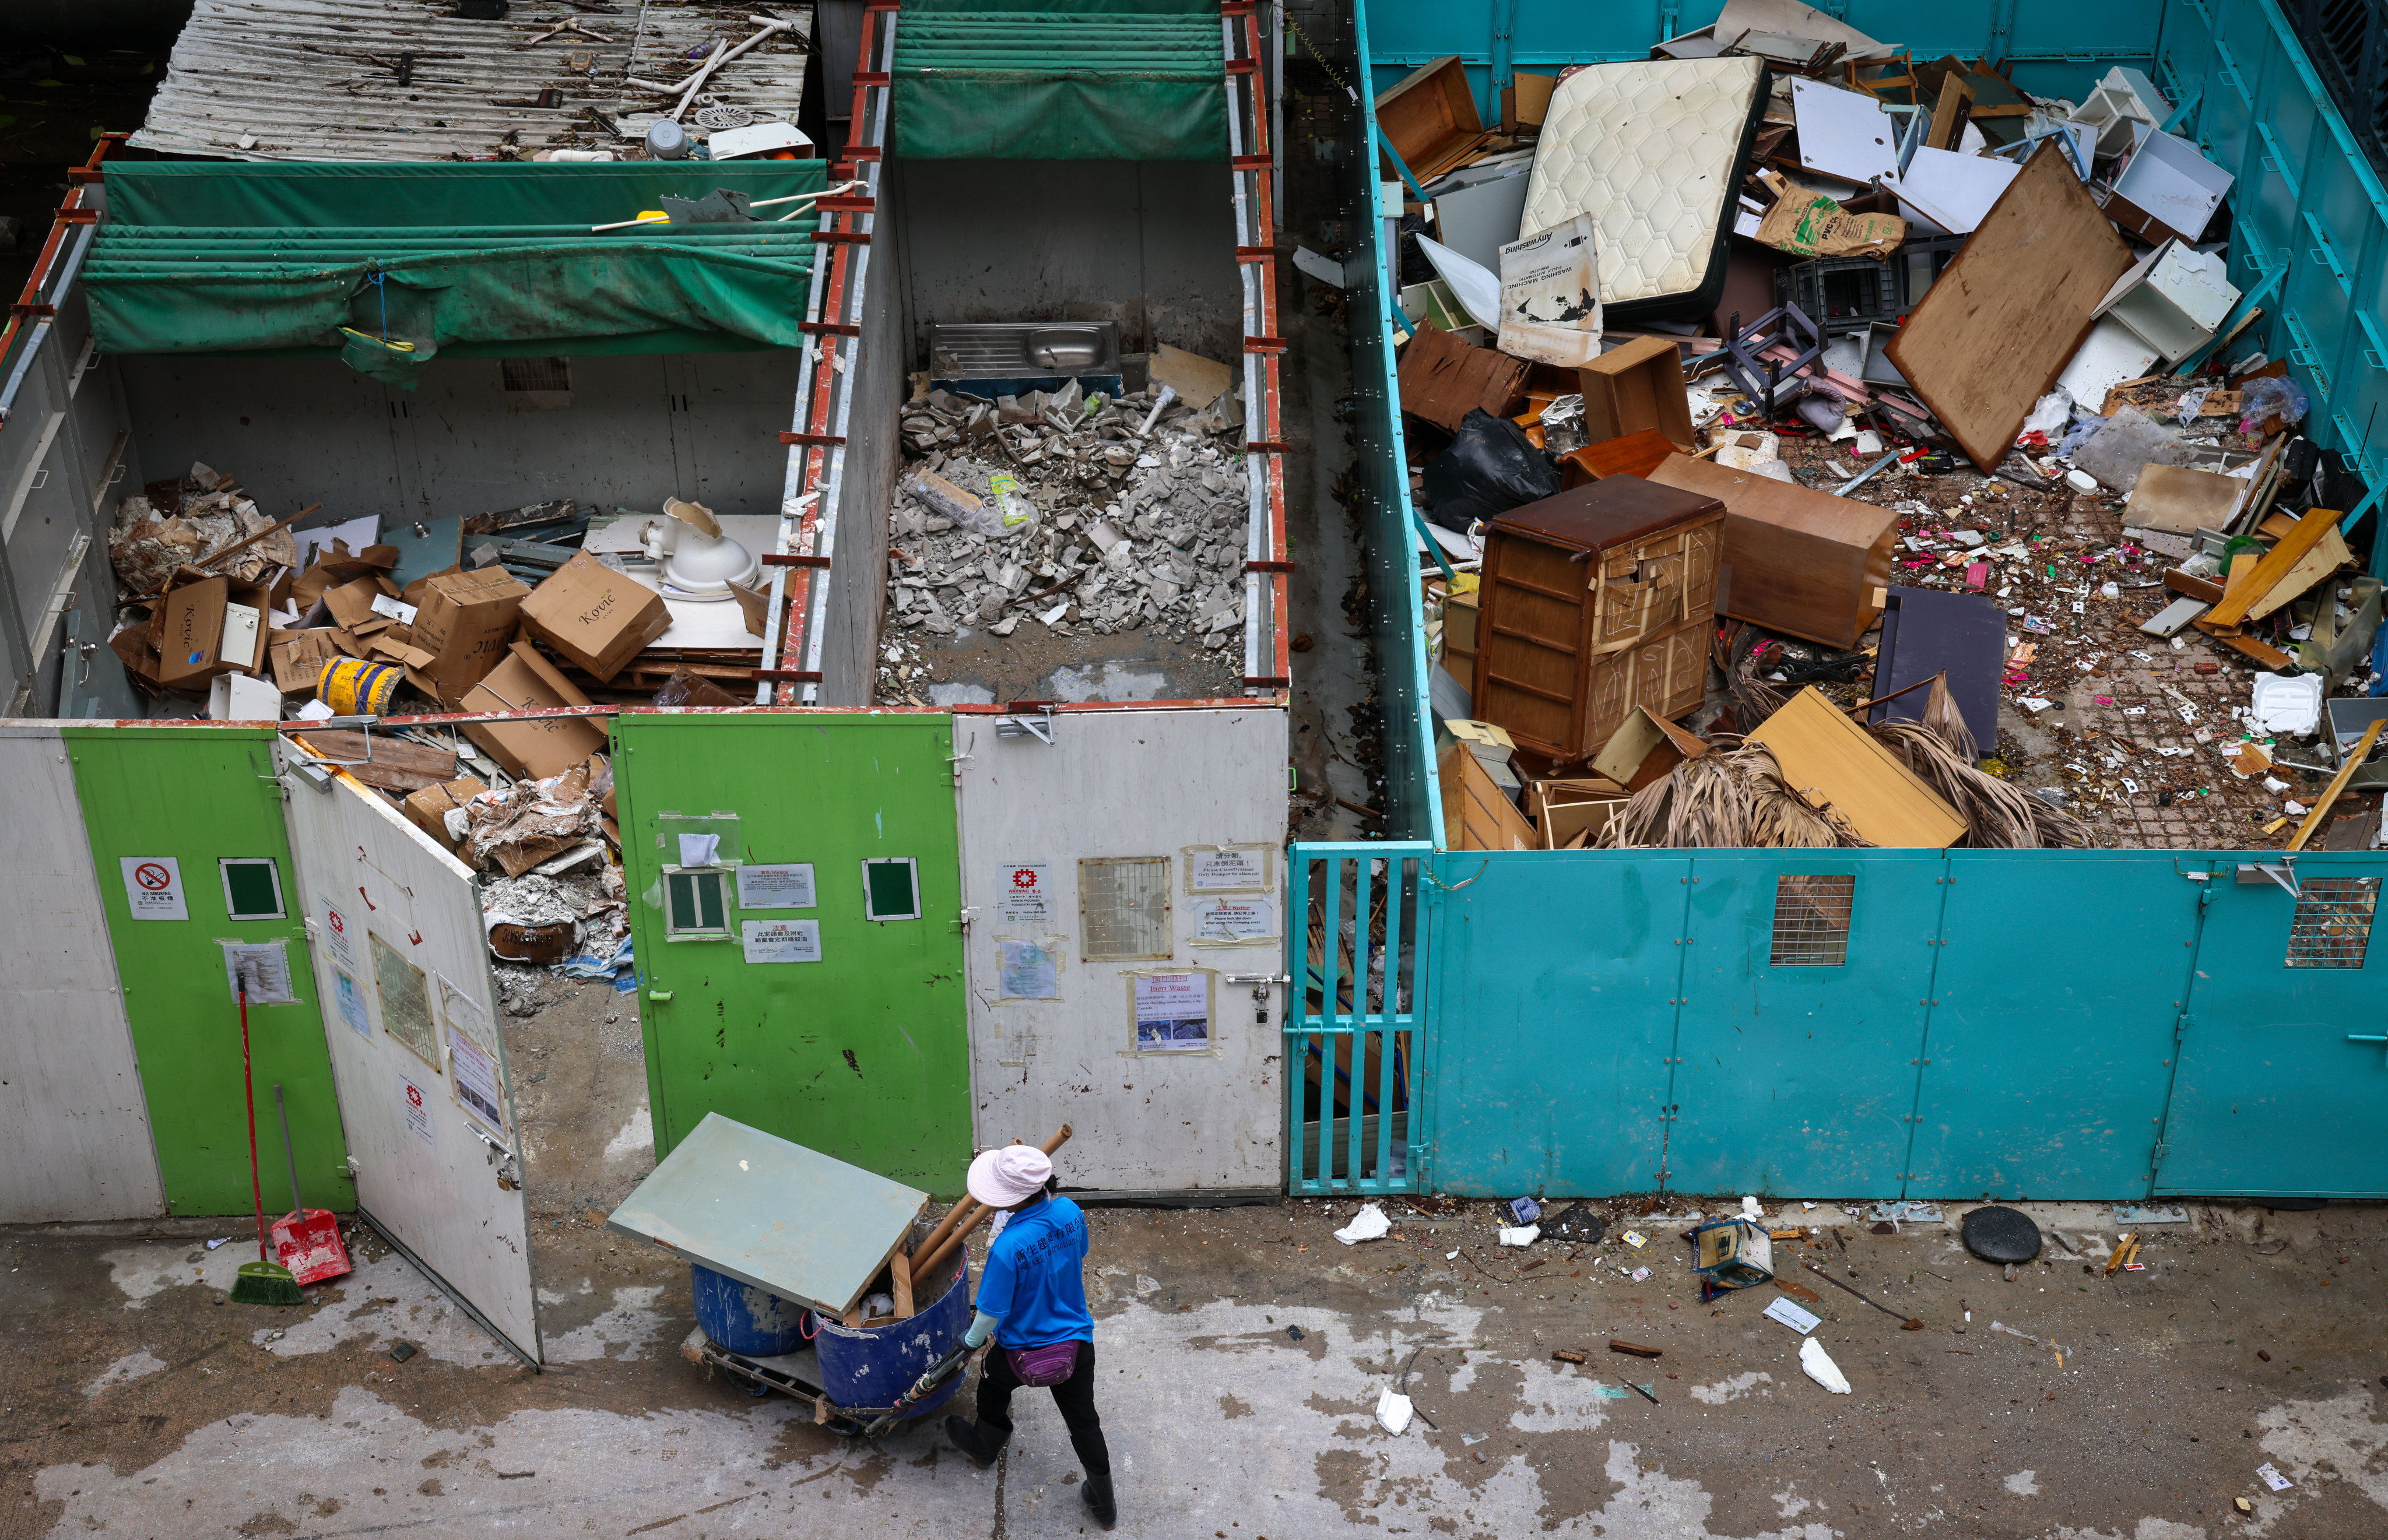 A refuse collection point in Wang Tau Hom. Hong Kong’s waste-charging scheme has been met with backlash from politicians, residents and stakeholders from the recycling business. Photo: Jelly Tse